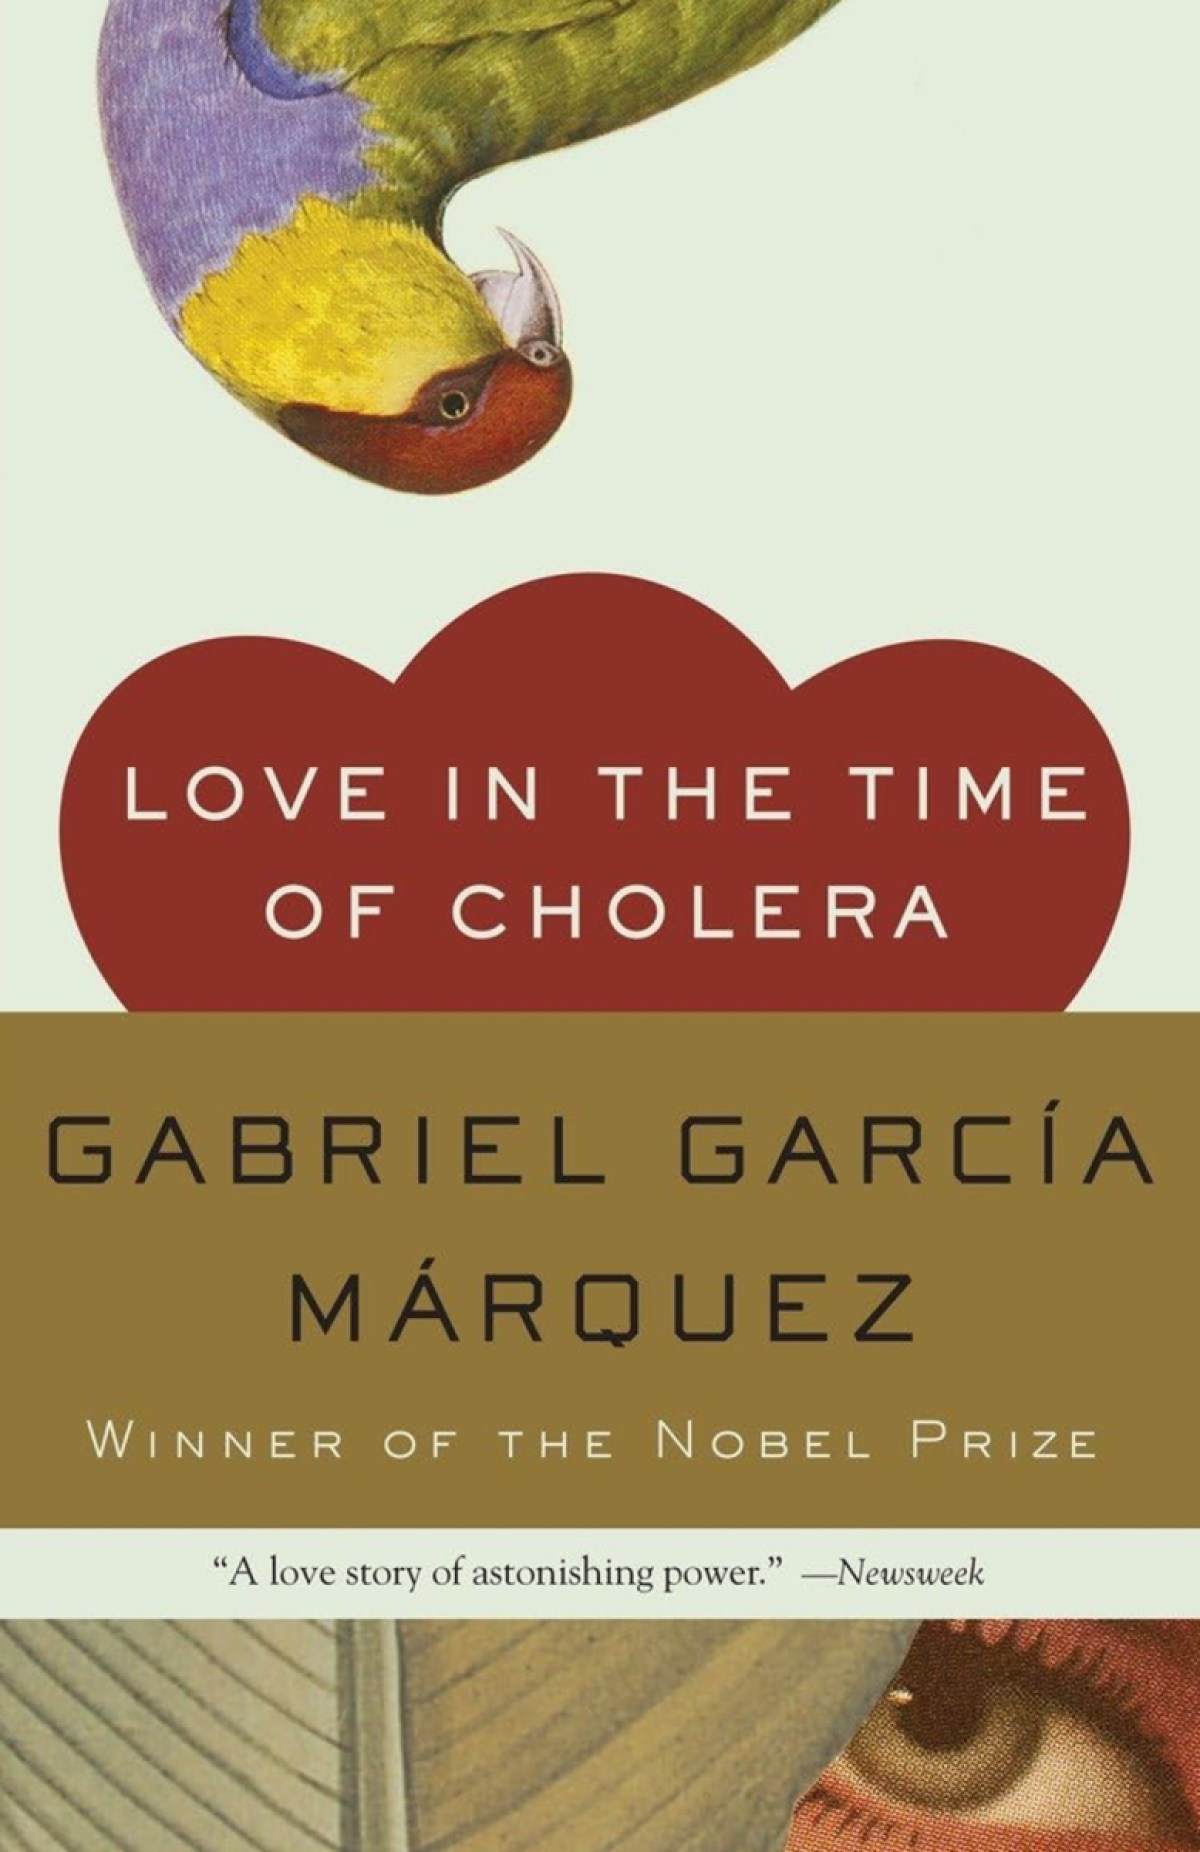 Love in the time of Cholera book cover